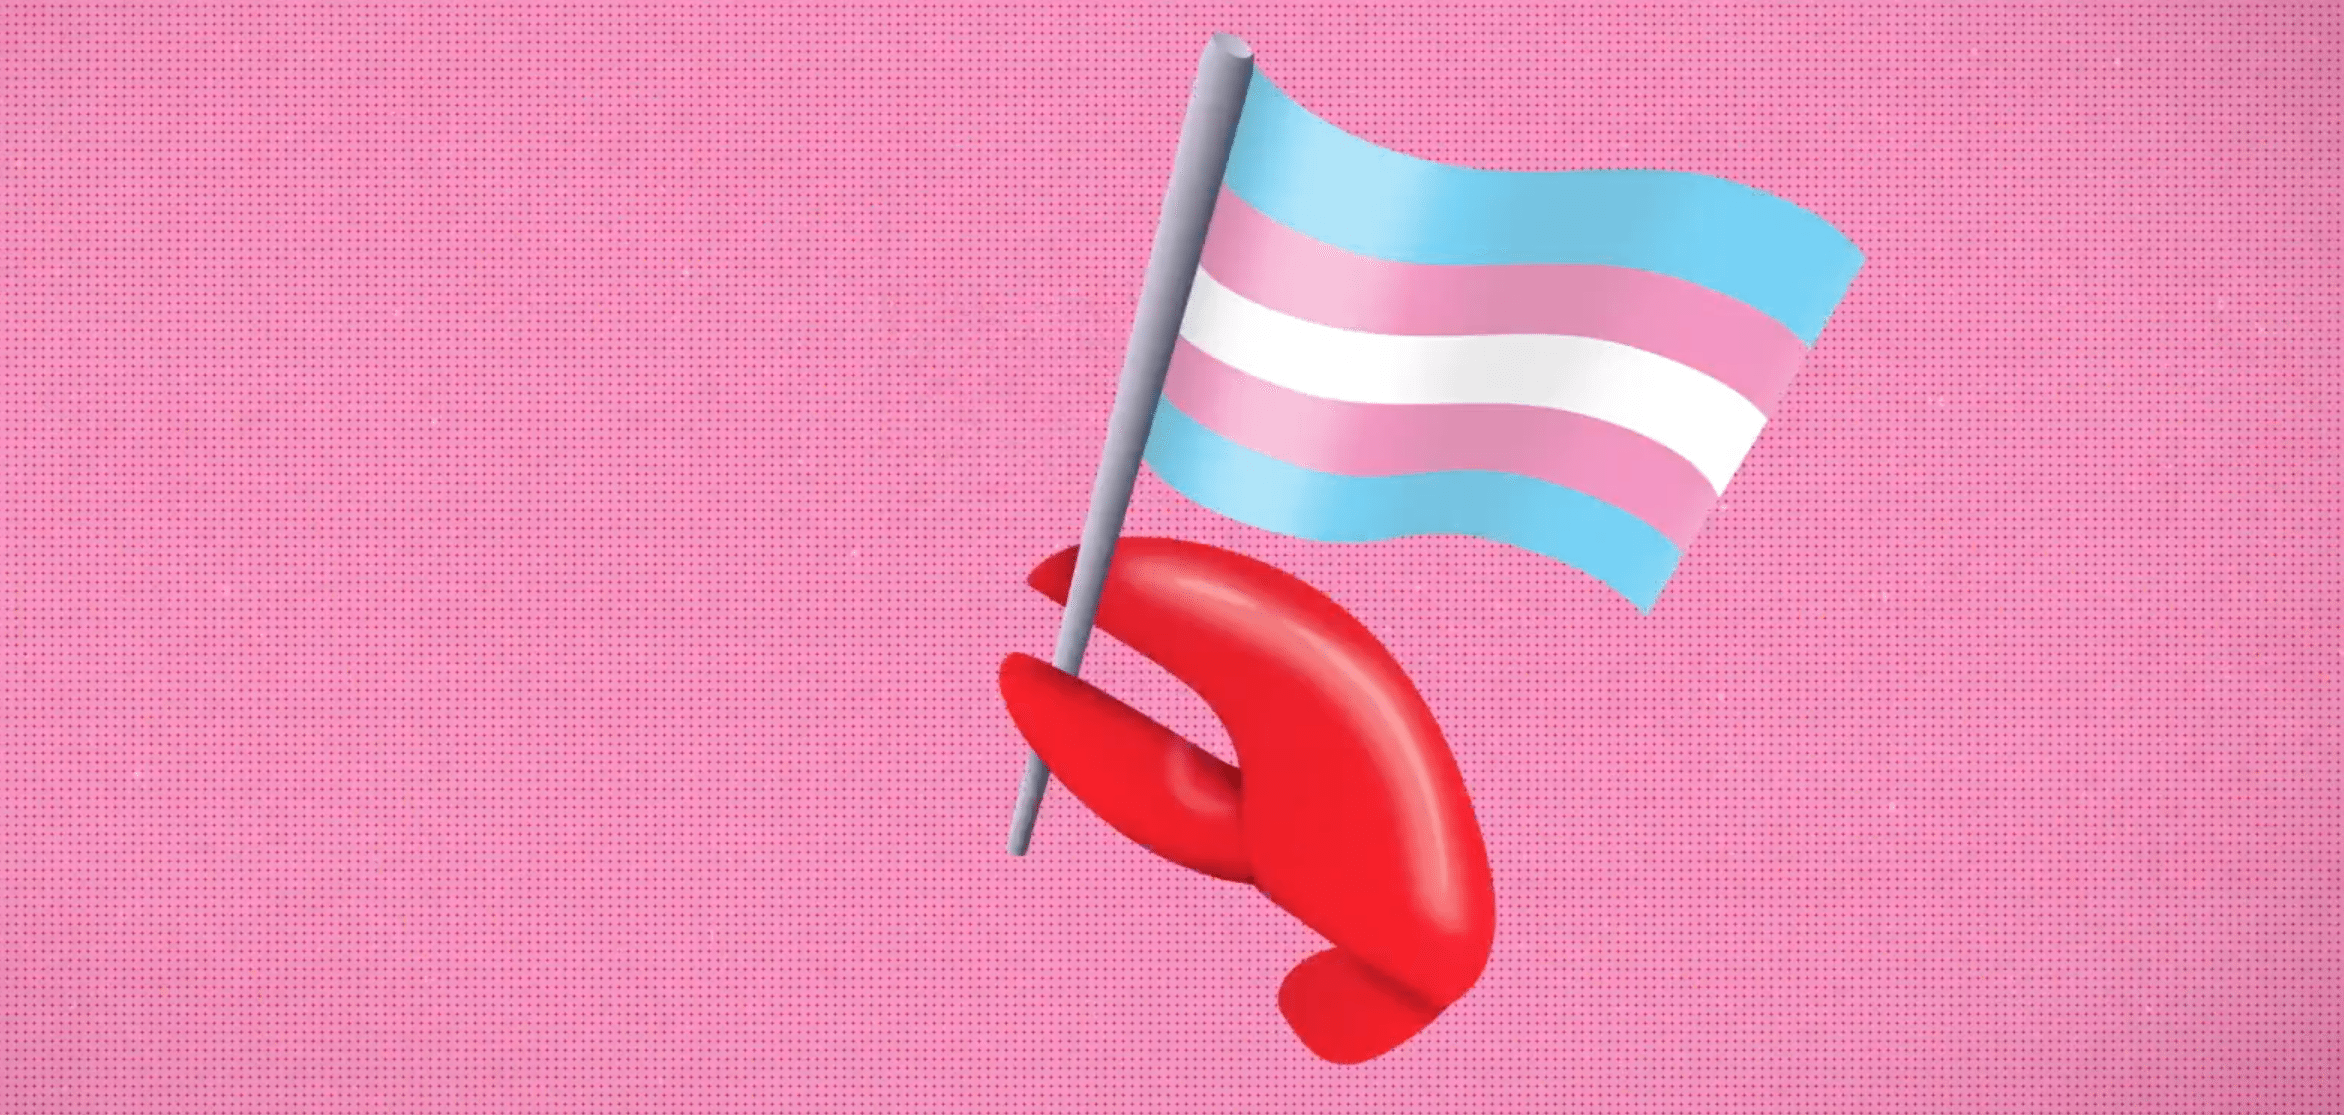 Some trans people are using the lobster emoji as their Pride symbol